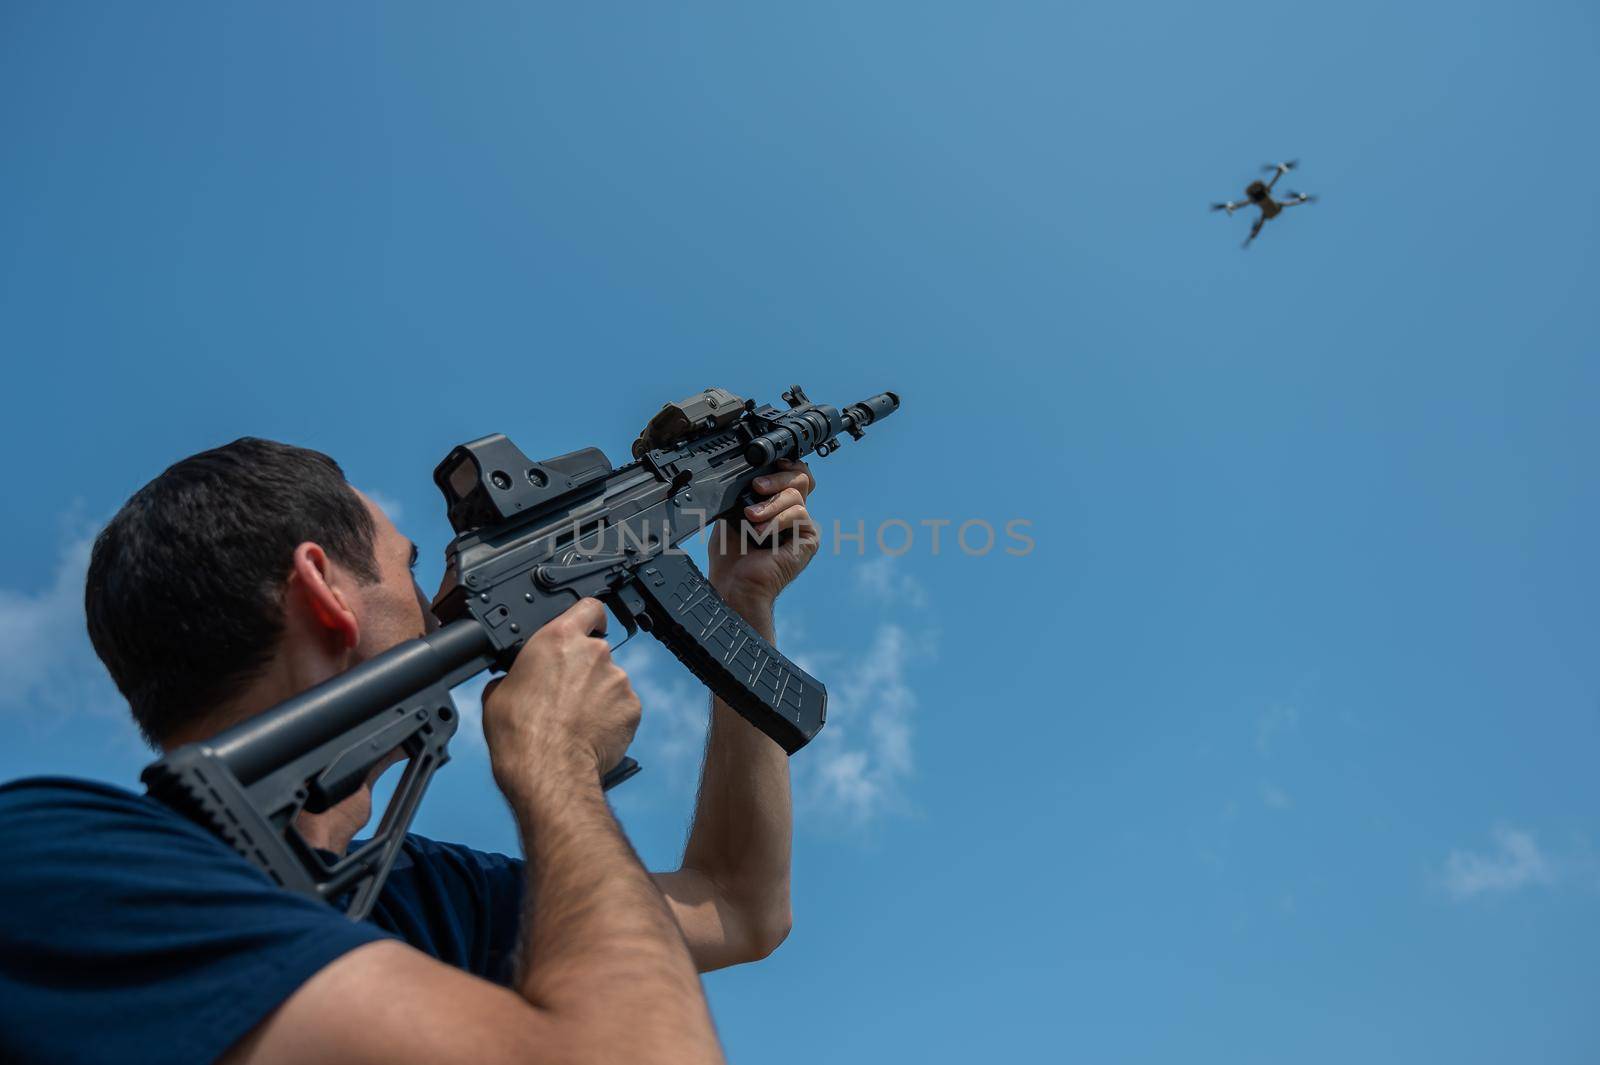 Caucasian man shoots a flying drone with a rifle